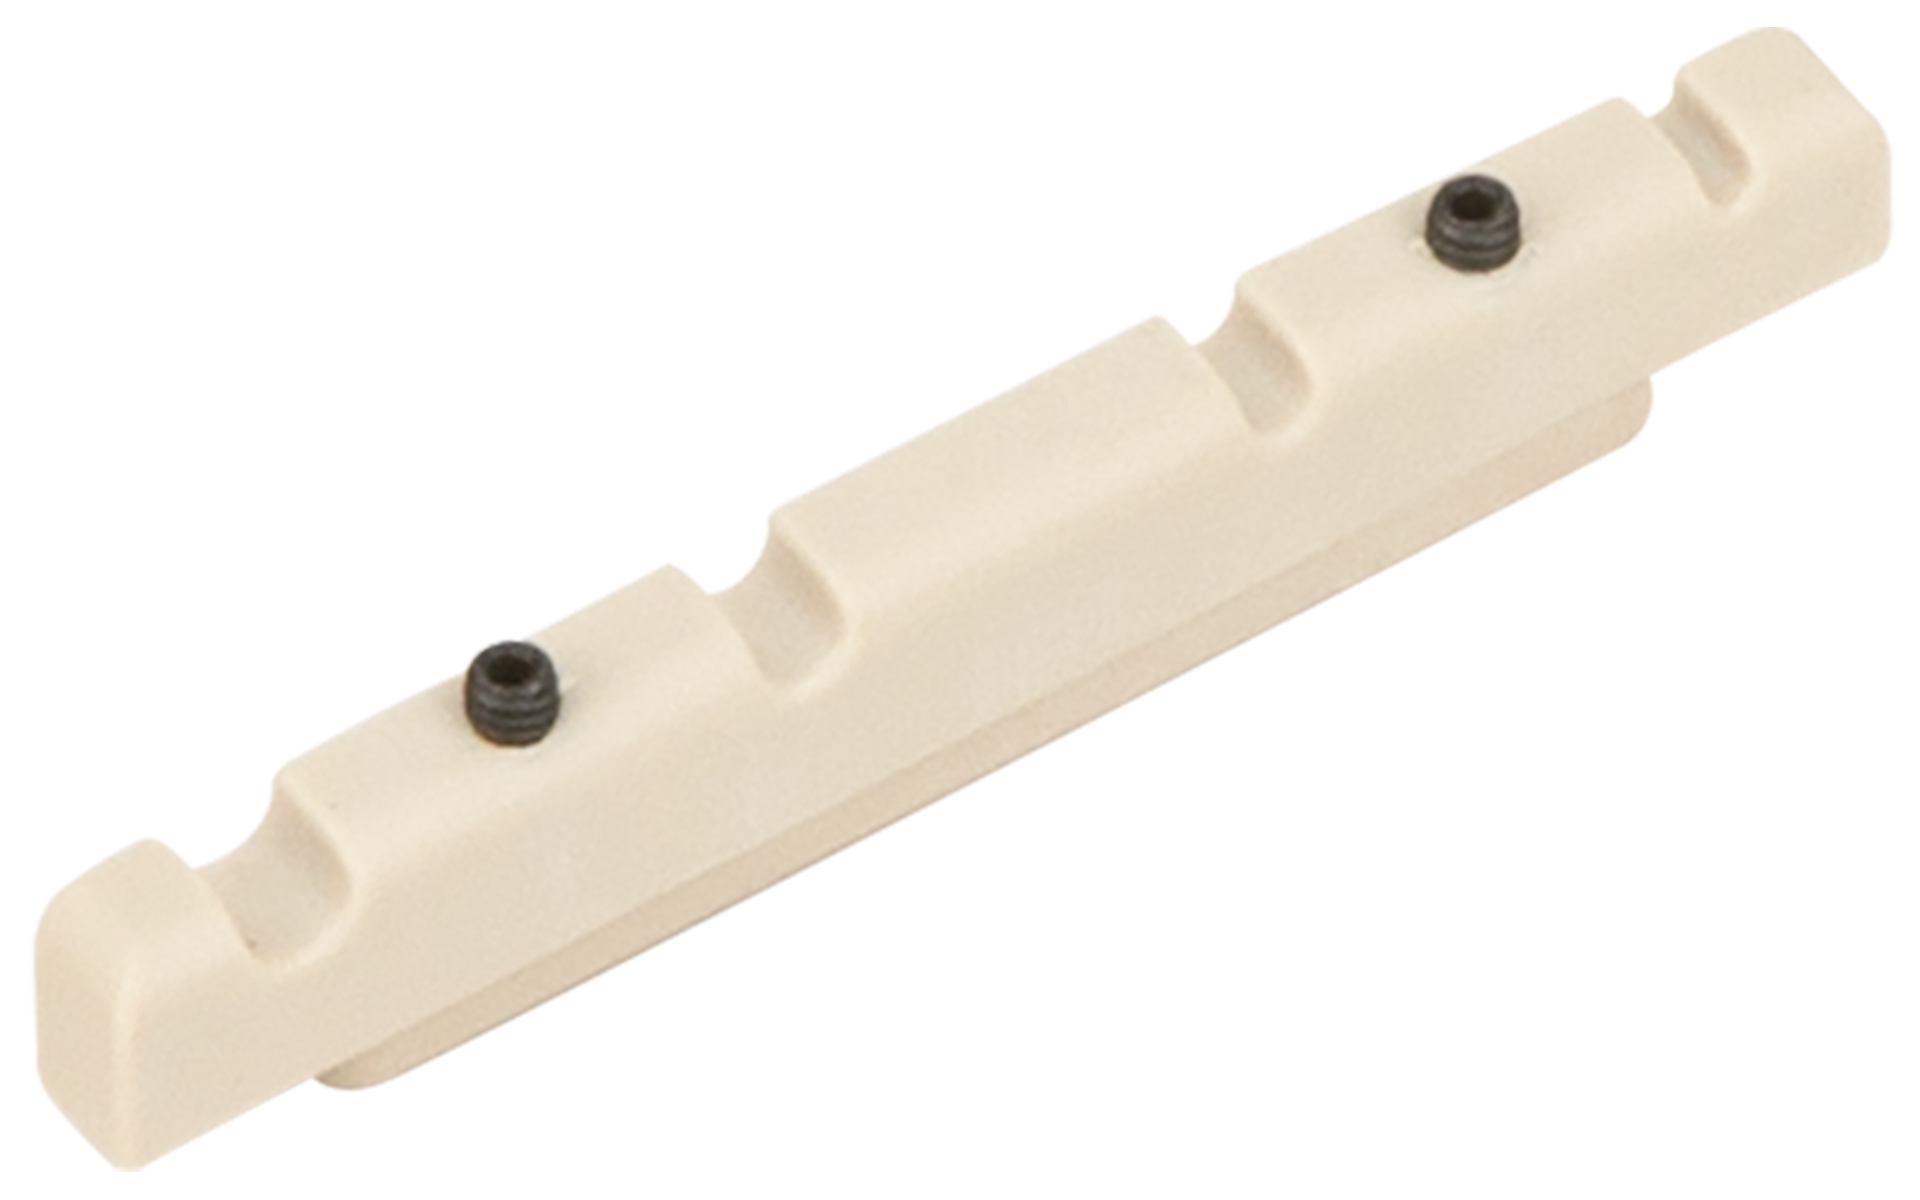 Sadowsky Parts - Just-A-Nut III - 4 String - 44.8 mm (1.75") Lefthand